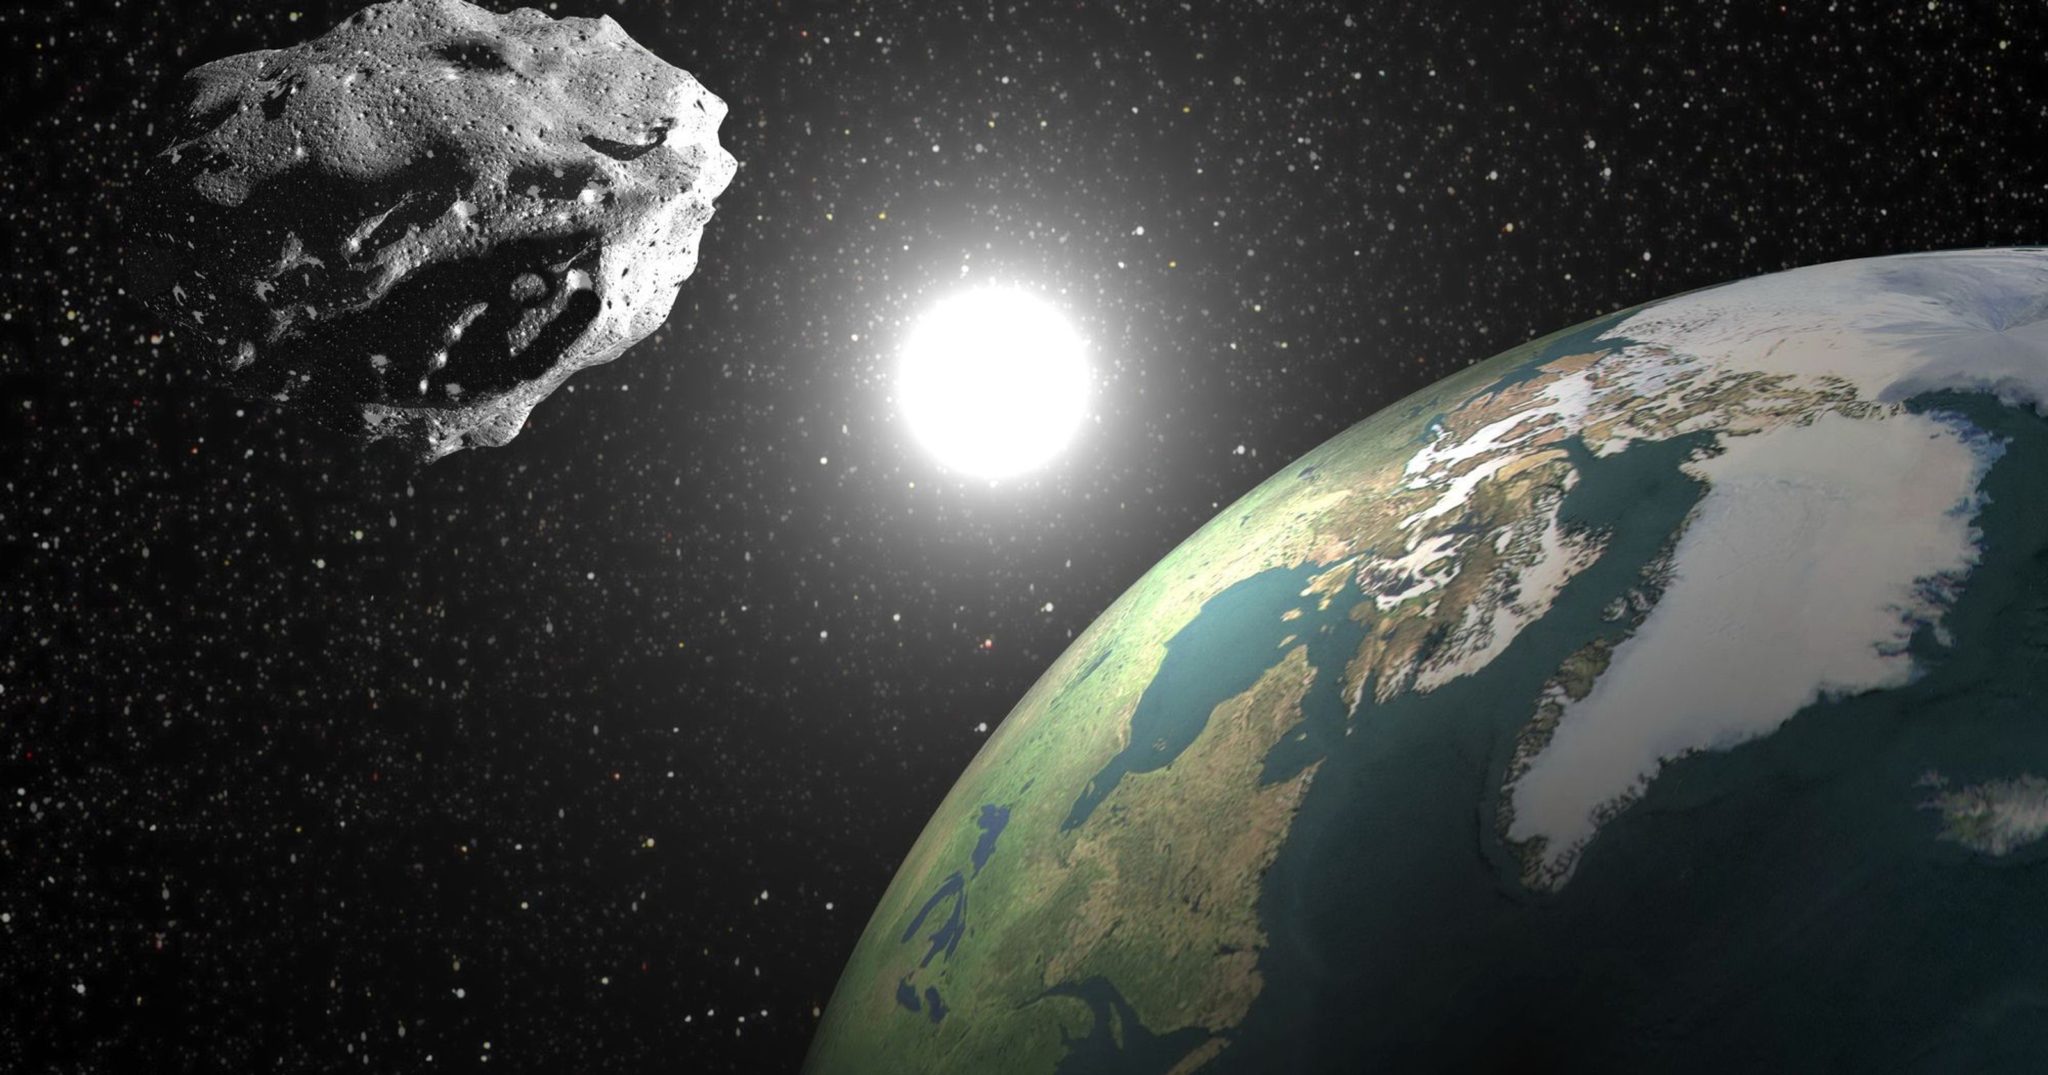 NASA Warning: 850 Foot Asteroid Approaches Earth This Week - Great Lakes Ledger2048 x 1075